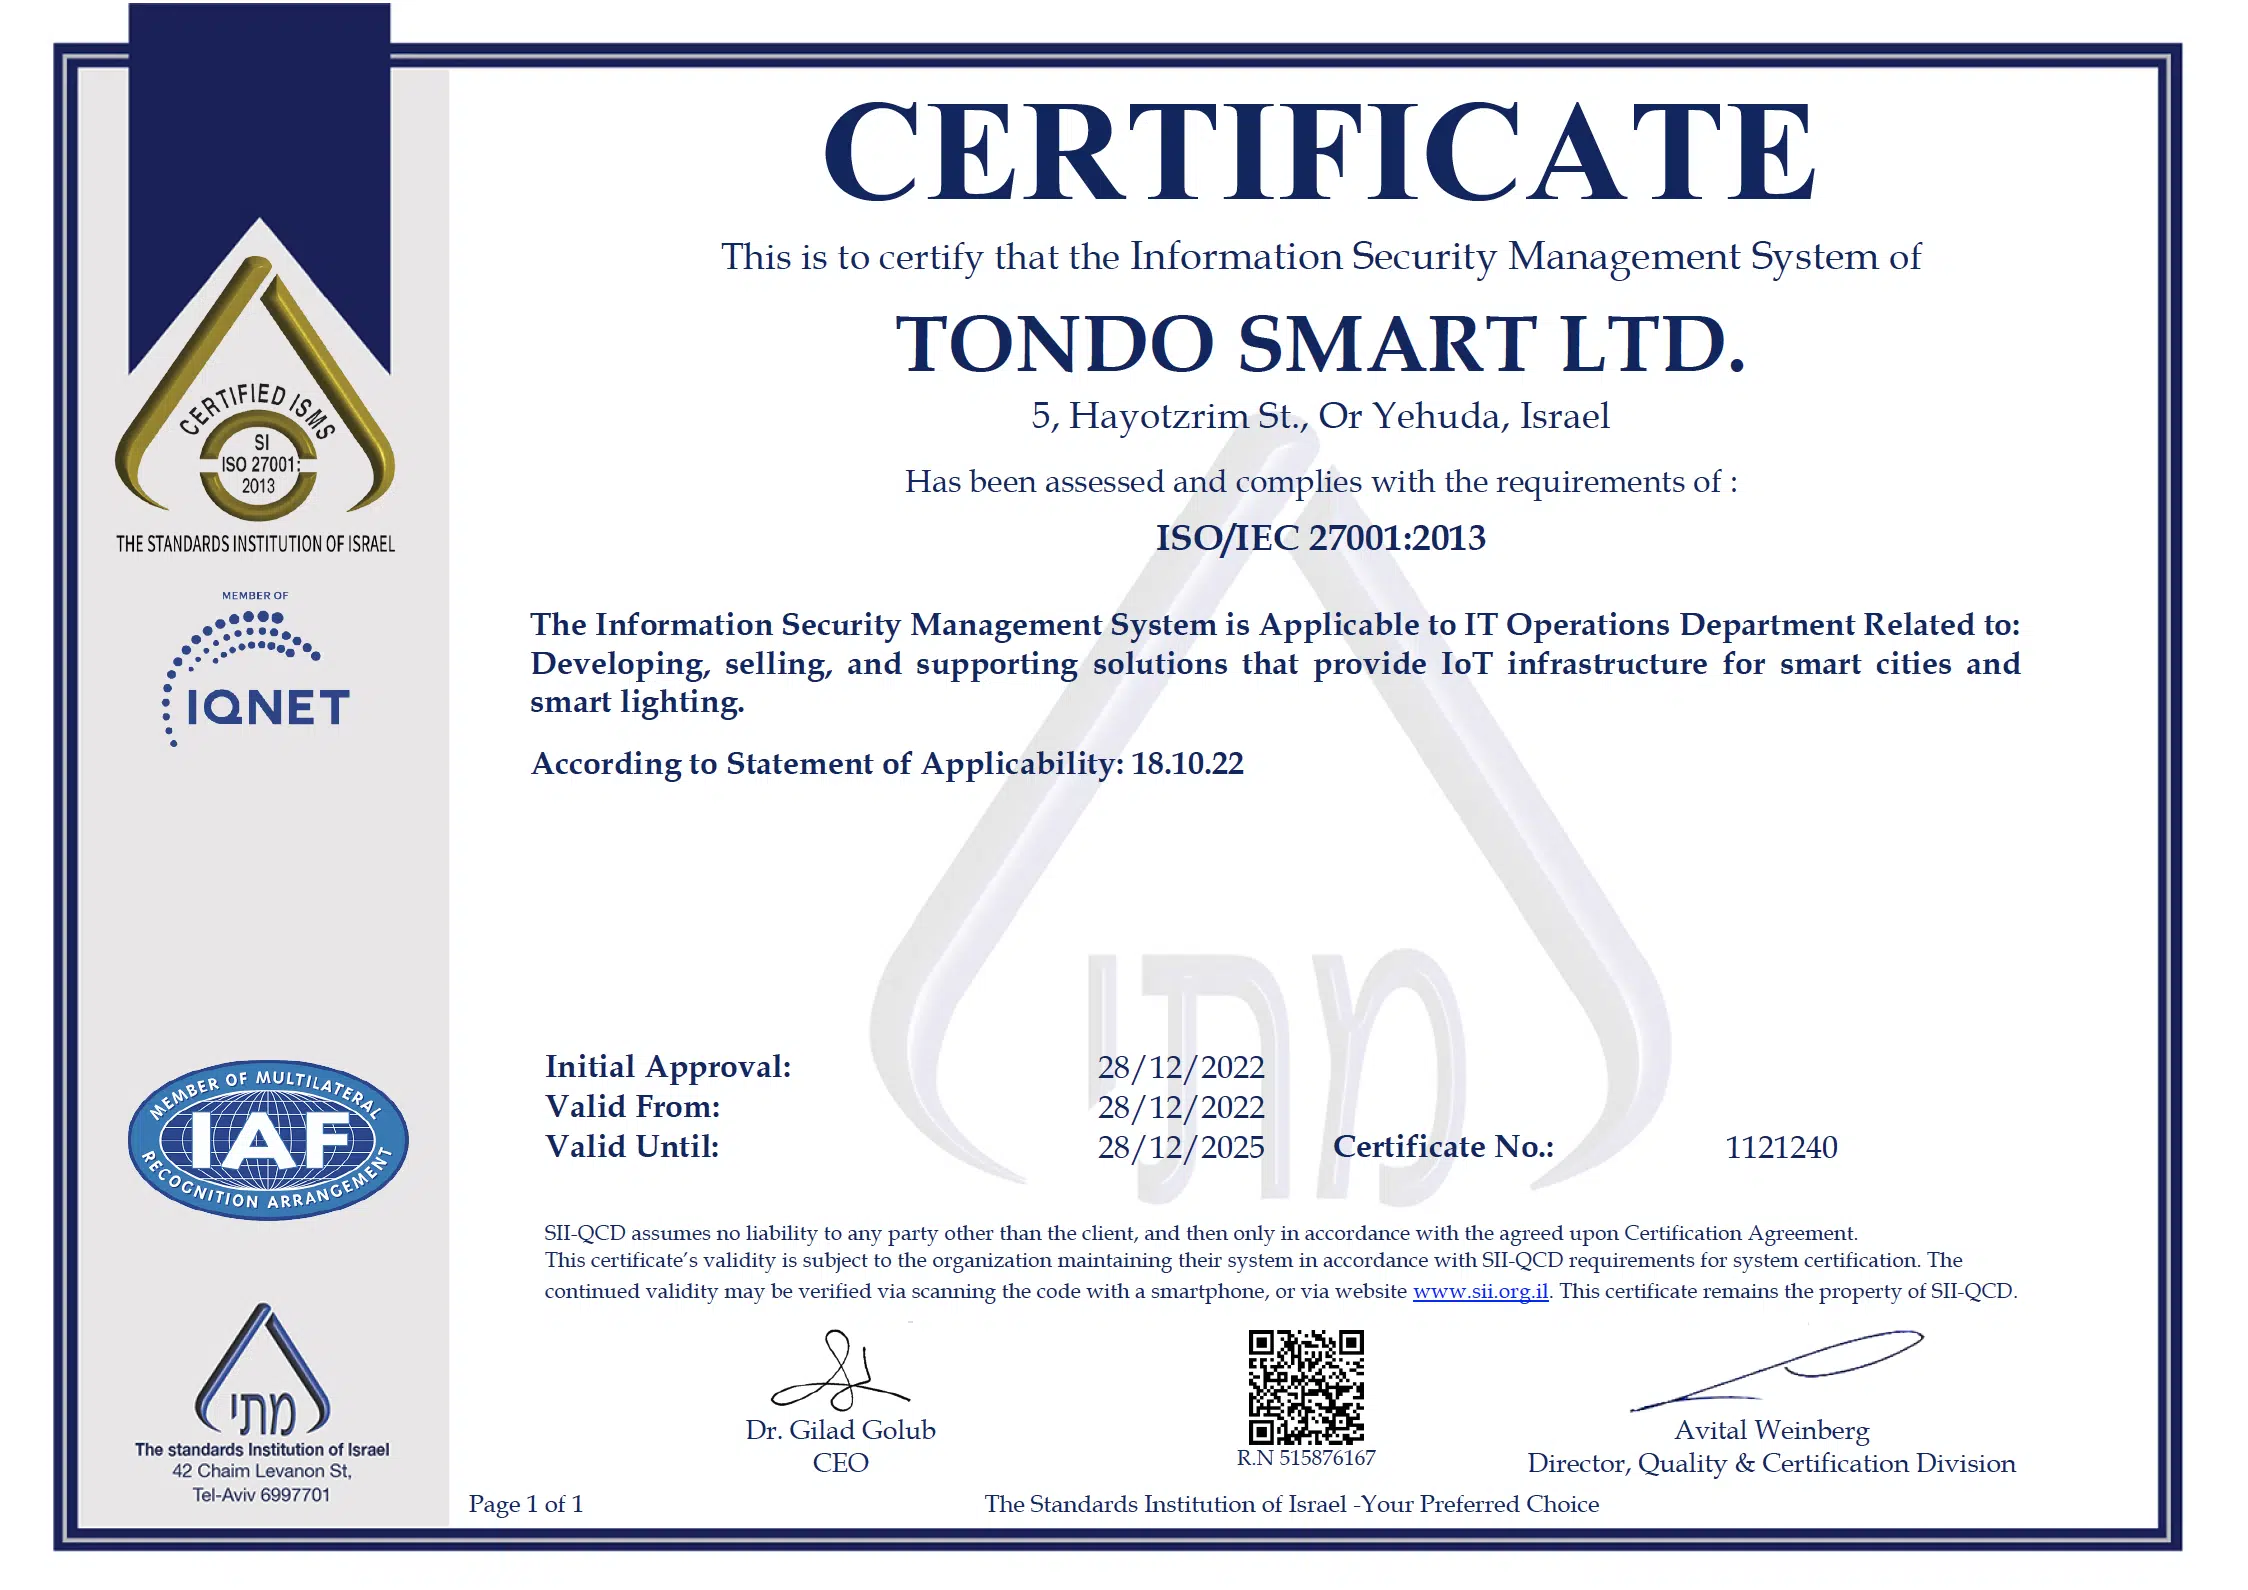 Tondo Smart ISO 27001 Certification Certificate from the Standards Institute of Israel